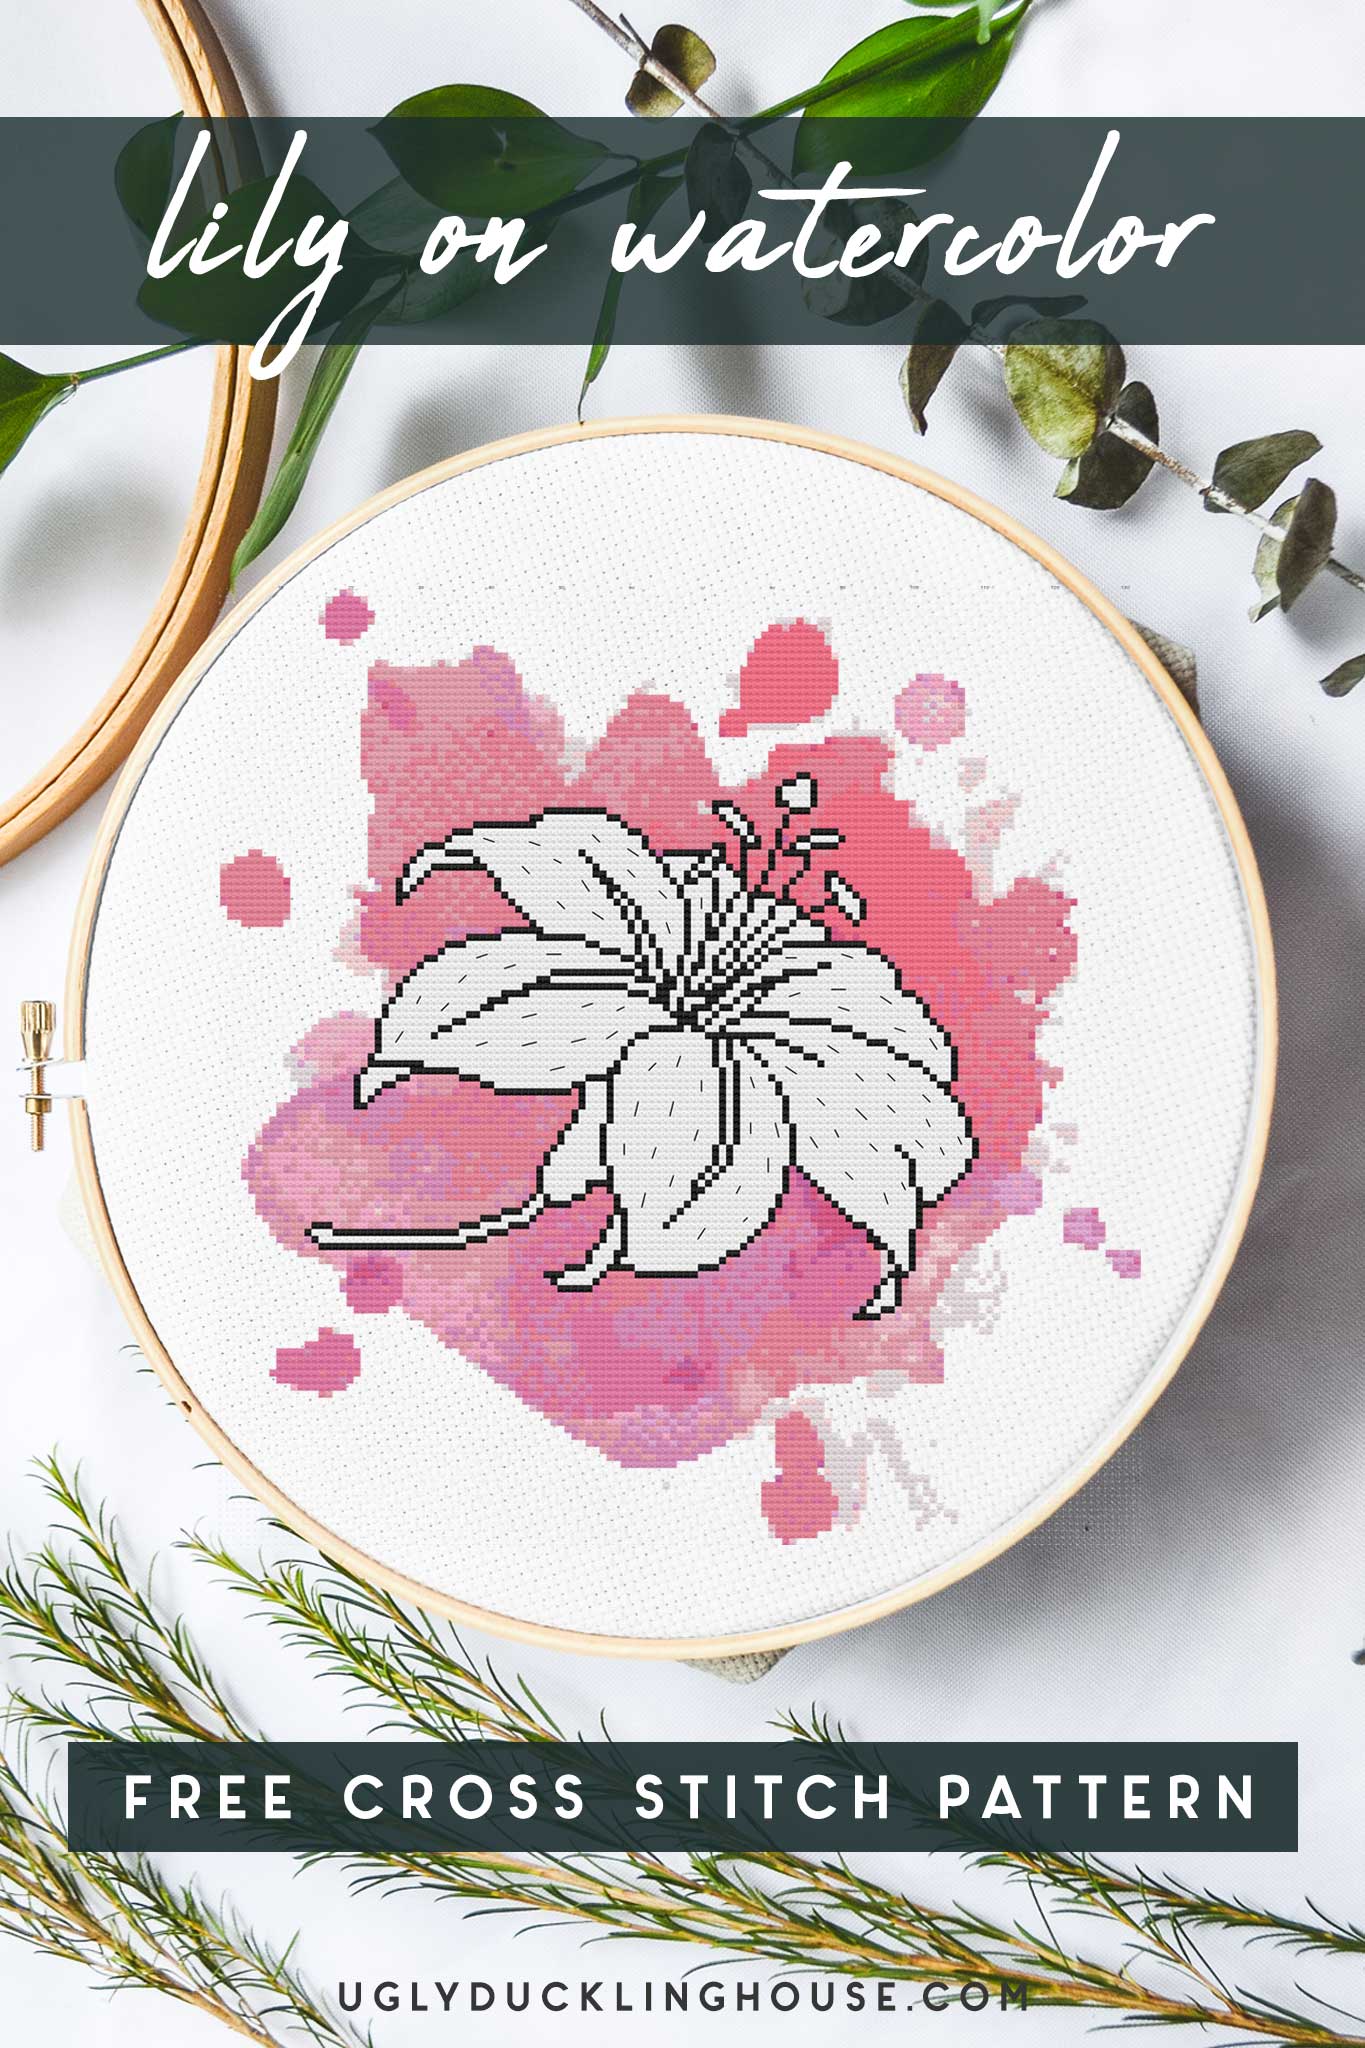 lily on watercolor cross stitch